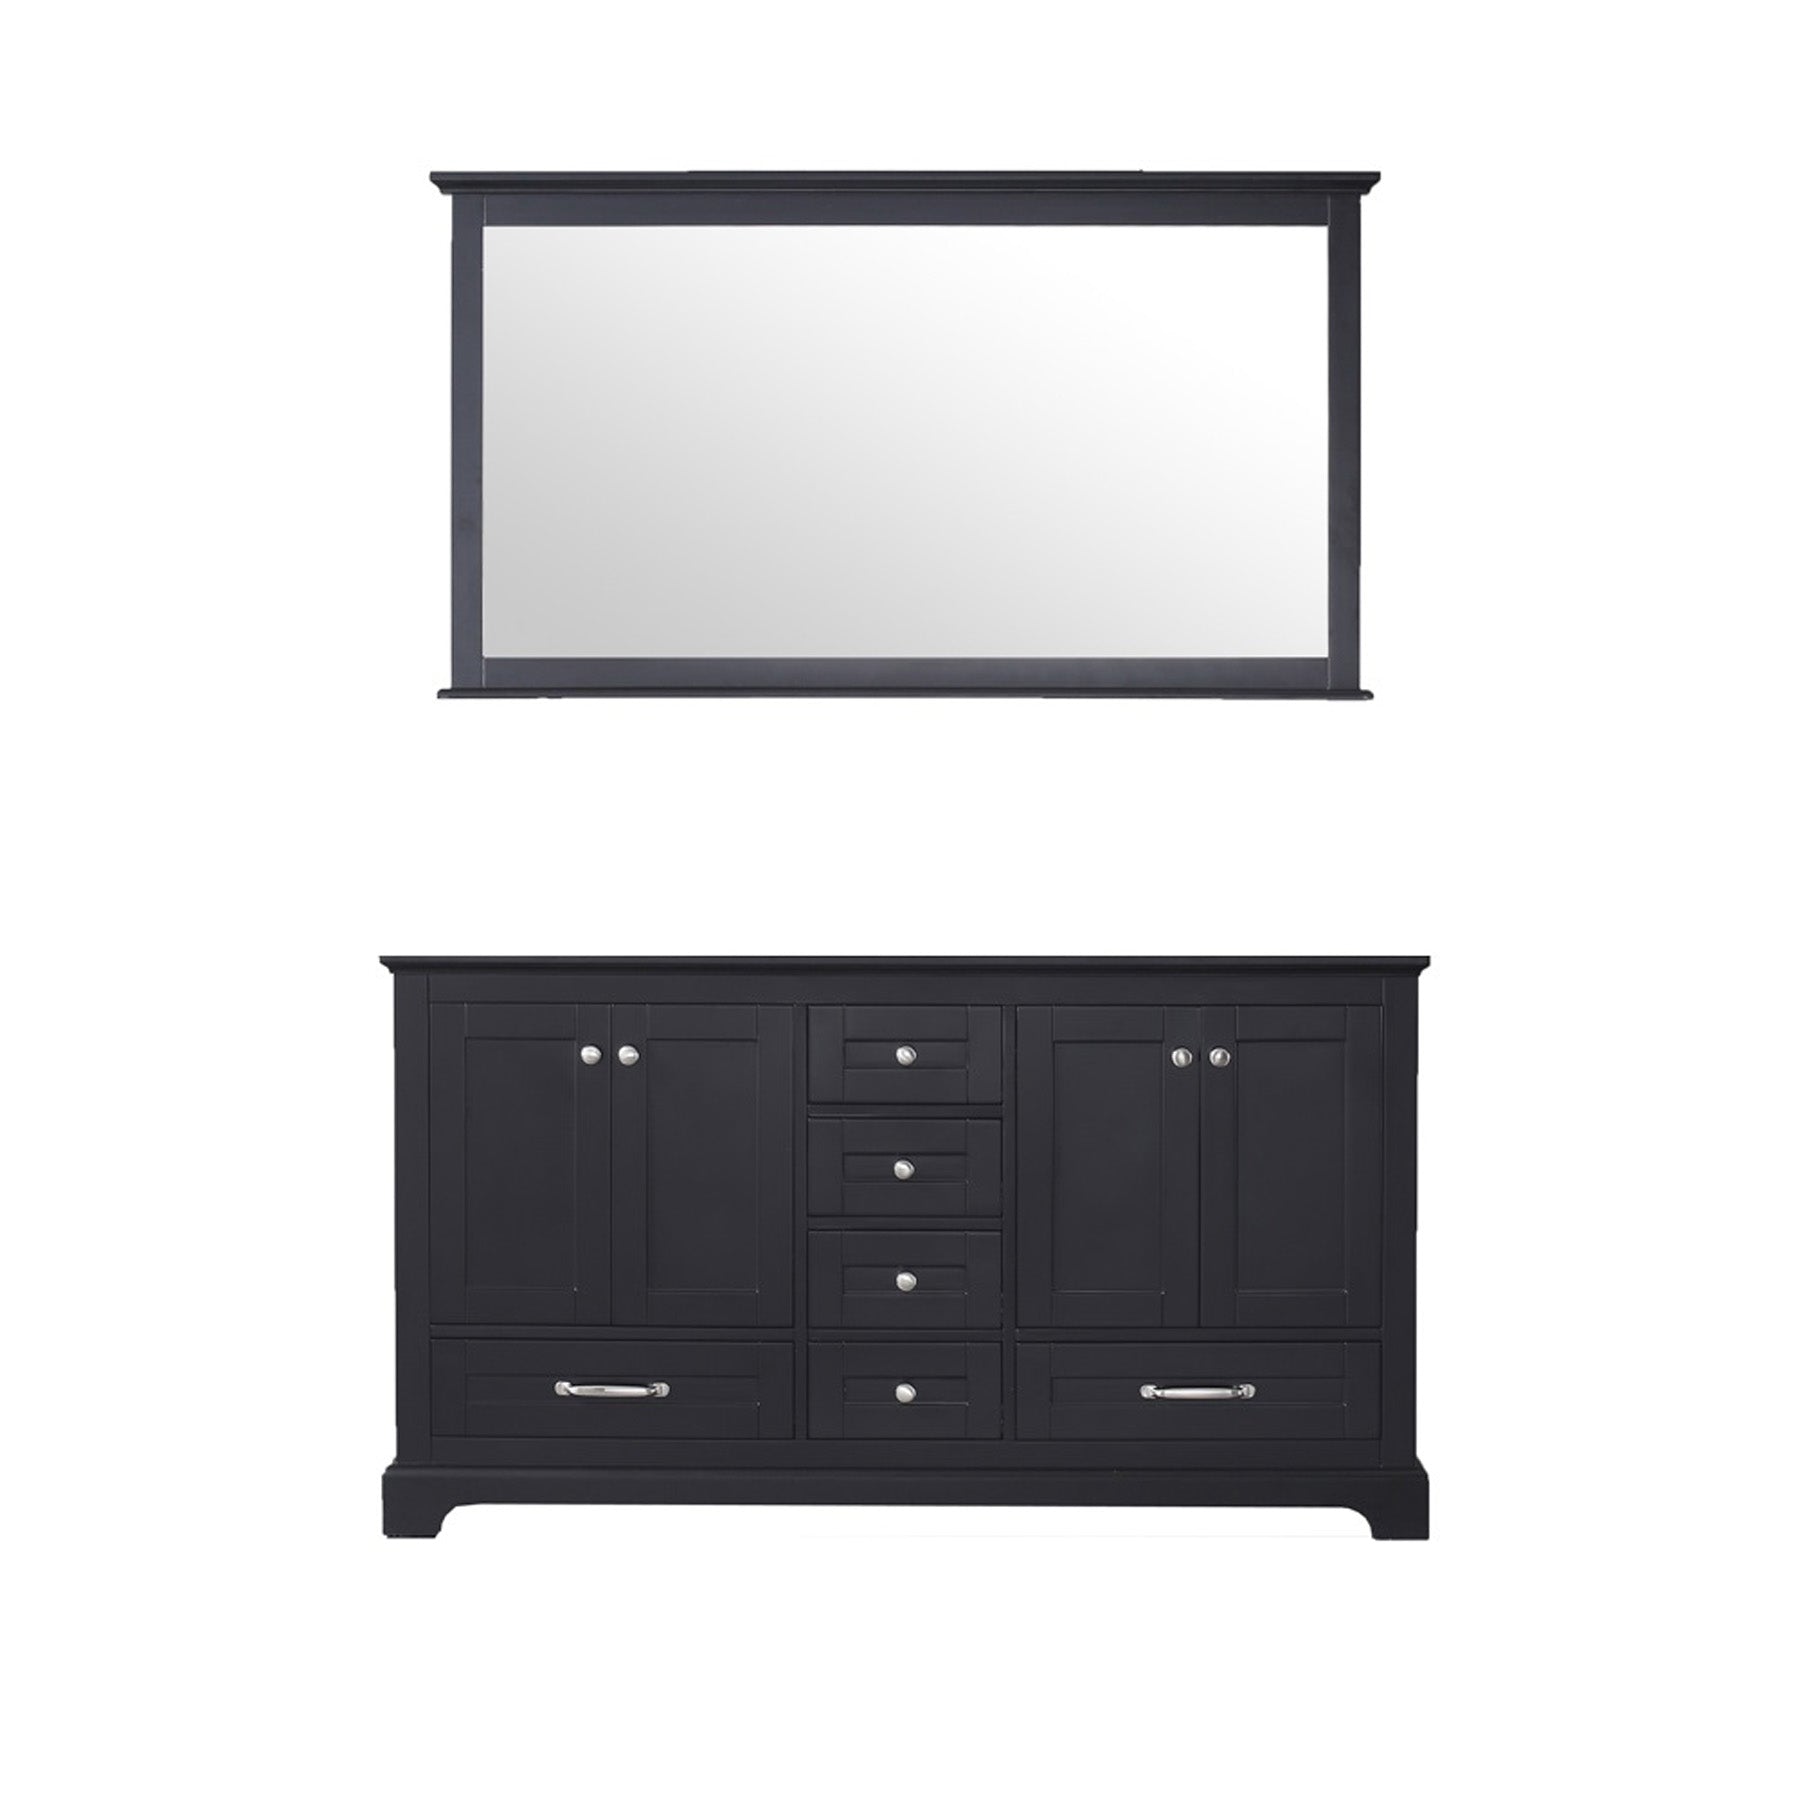 Dukes 60 In. Espresso Freestanding Double Bathroom Vanity Cabinet Without Top & 58 In. Mirror